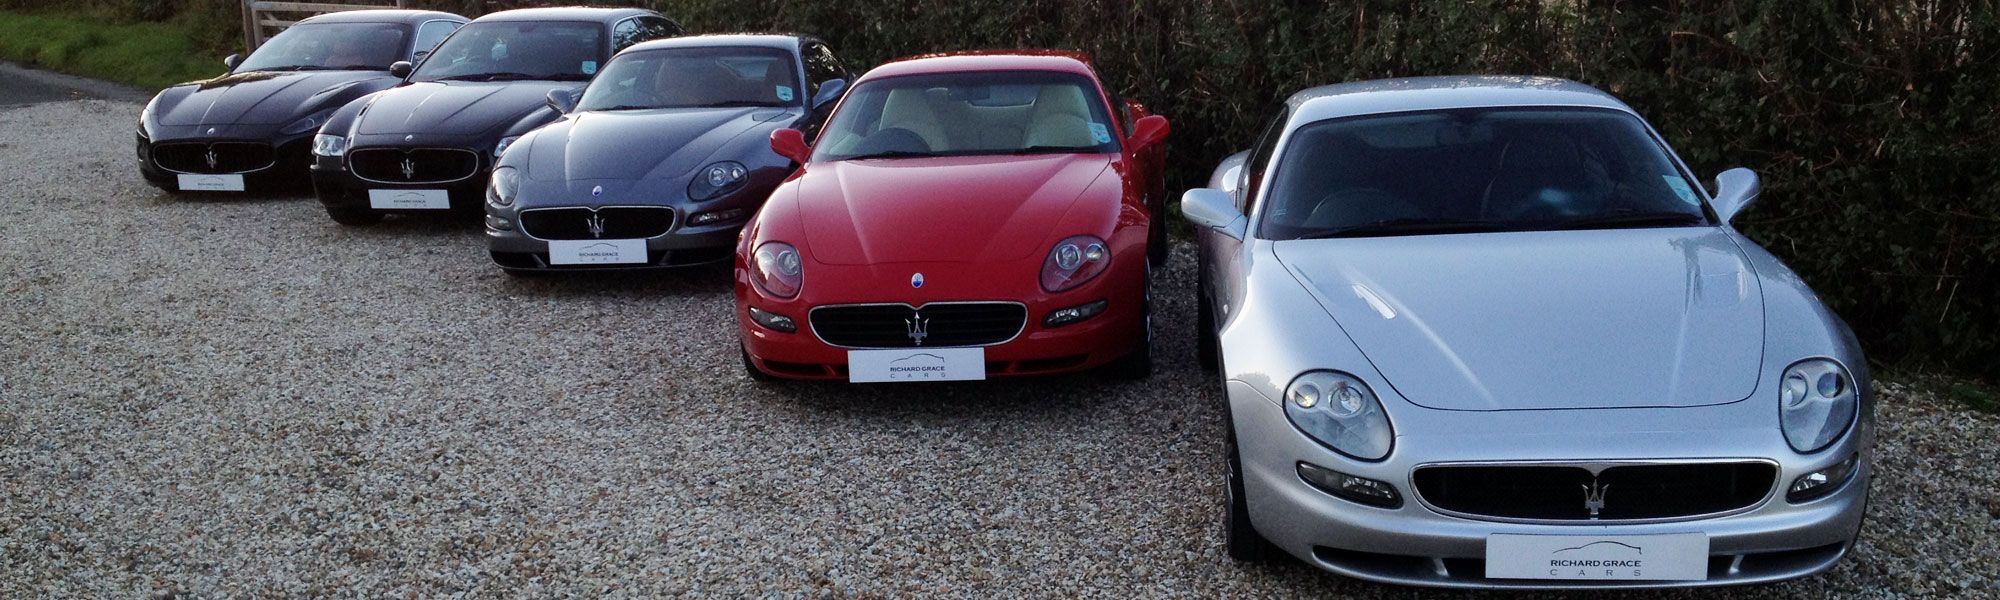 Line of Maserati vehicles at Richard Grace Cars in Chester